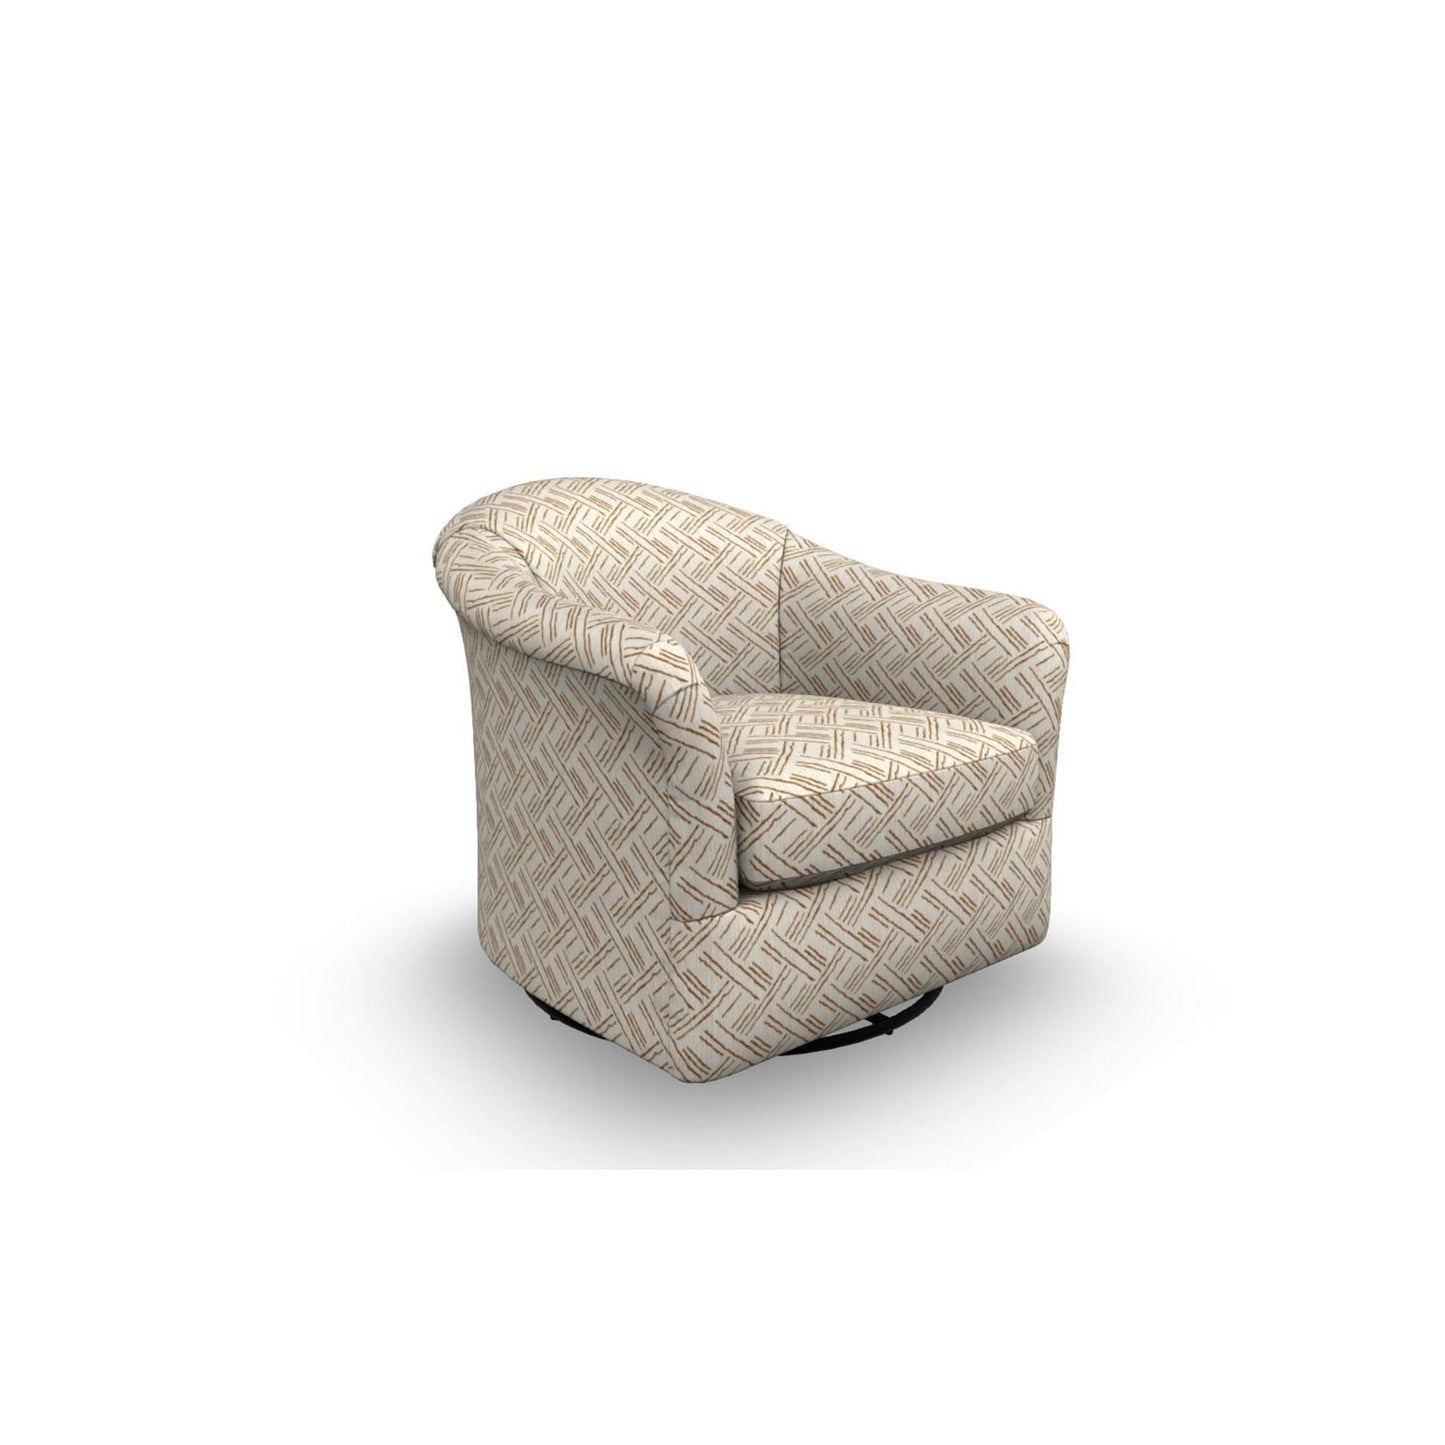 Darby Swivel Glider in Toffee Fabric